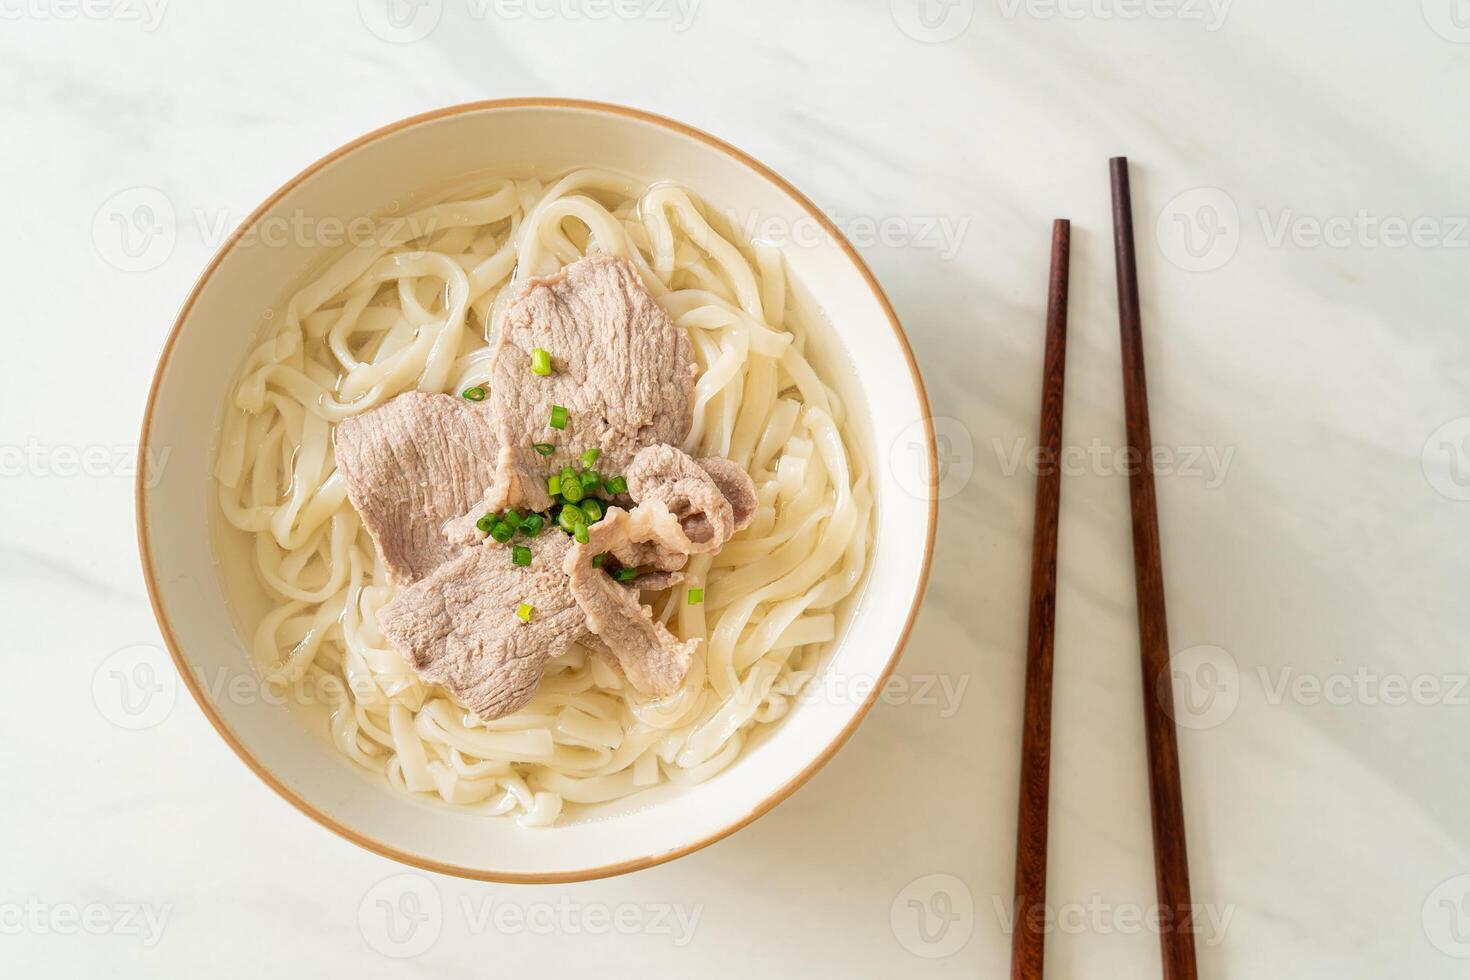 udon noodles with pork in clear soup photo